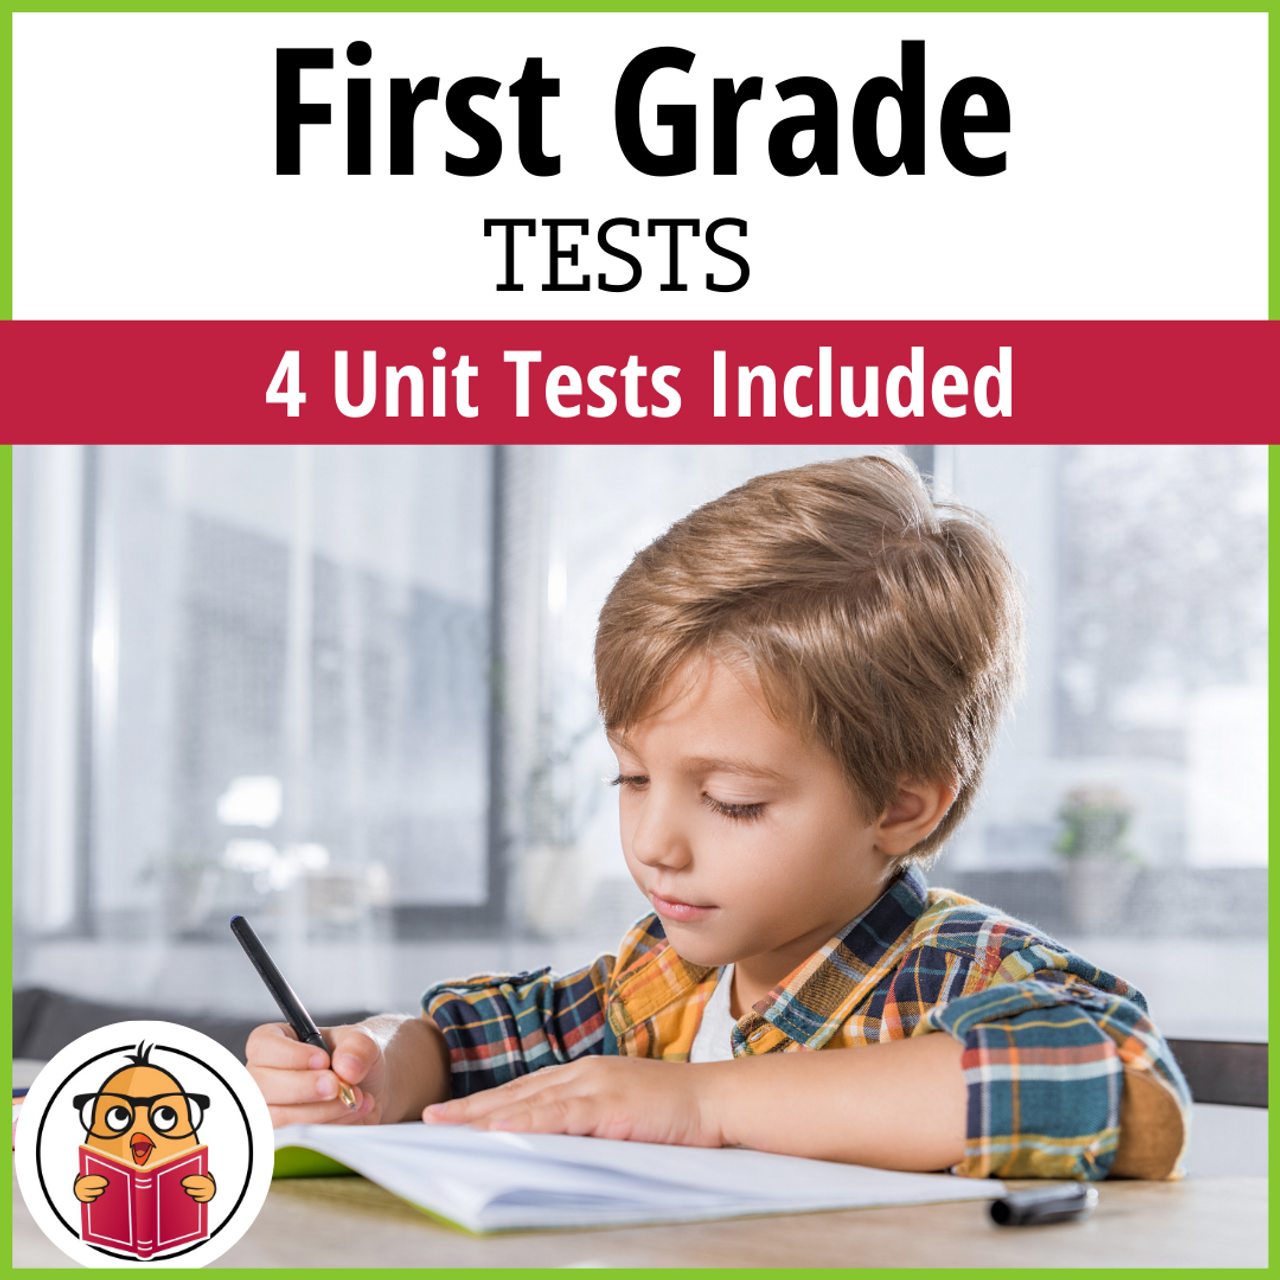 First Grade Tests